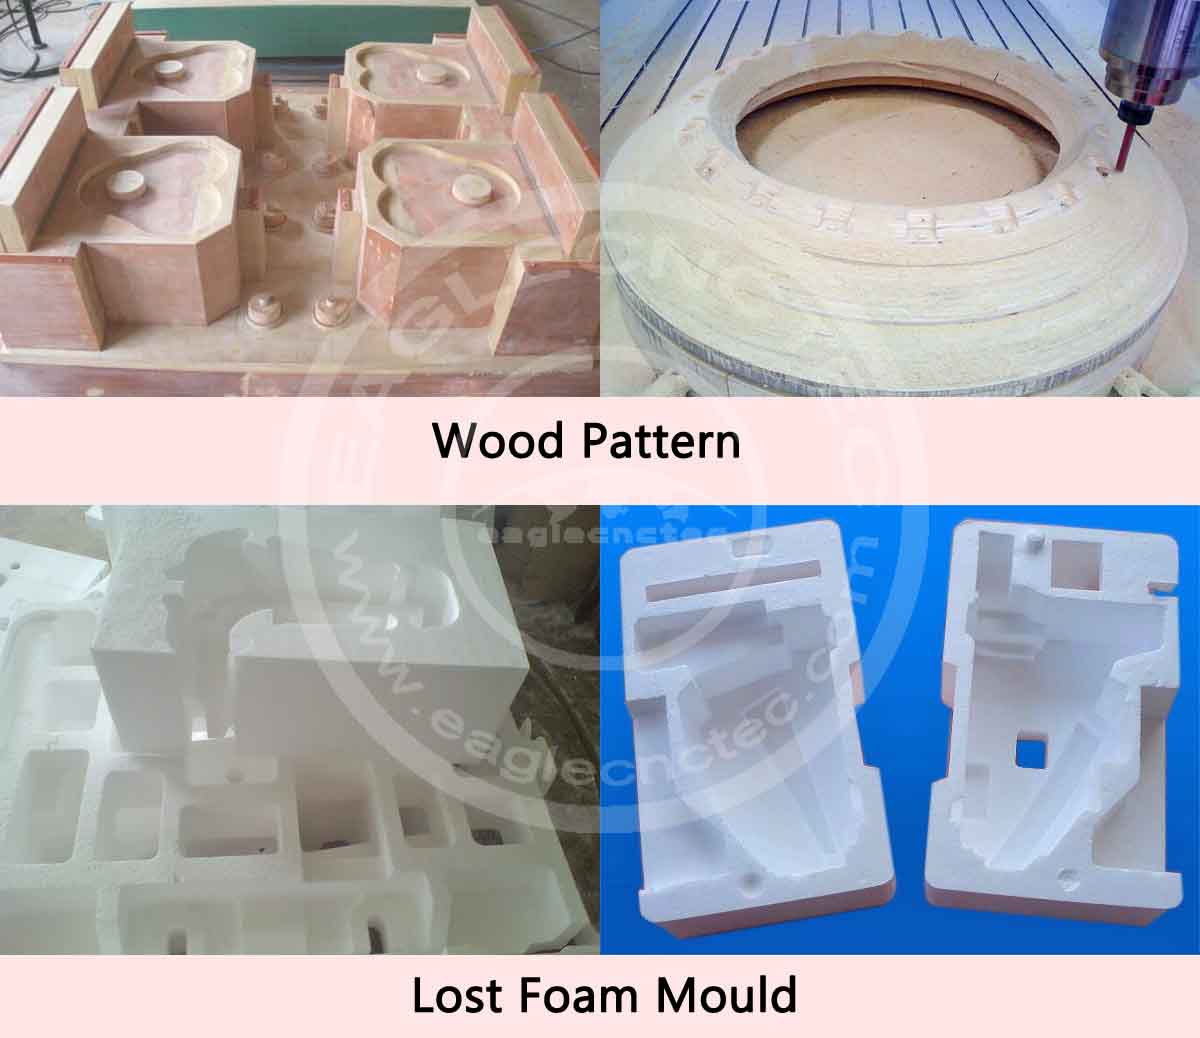 cnc foam milling machine working projects wooden and foam moulds